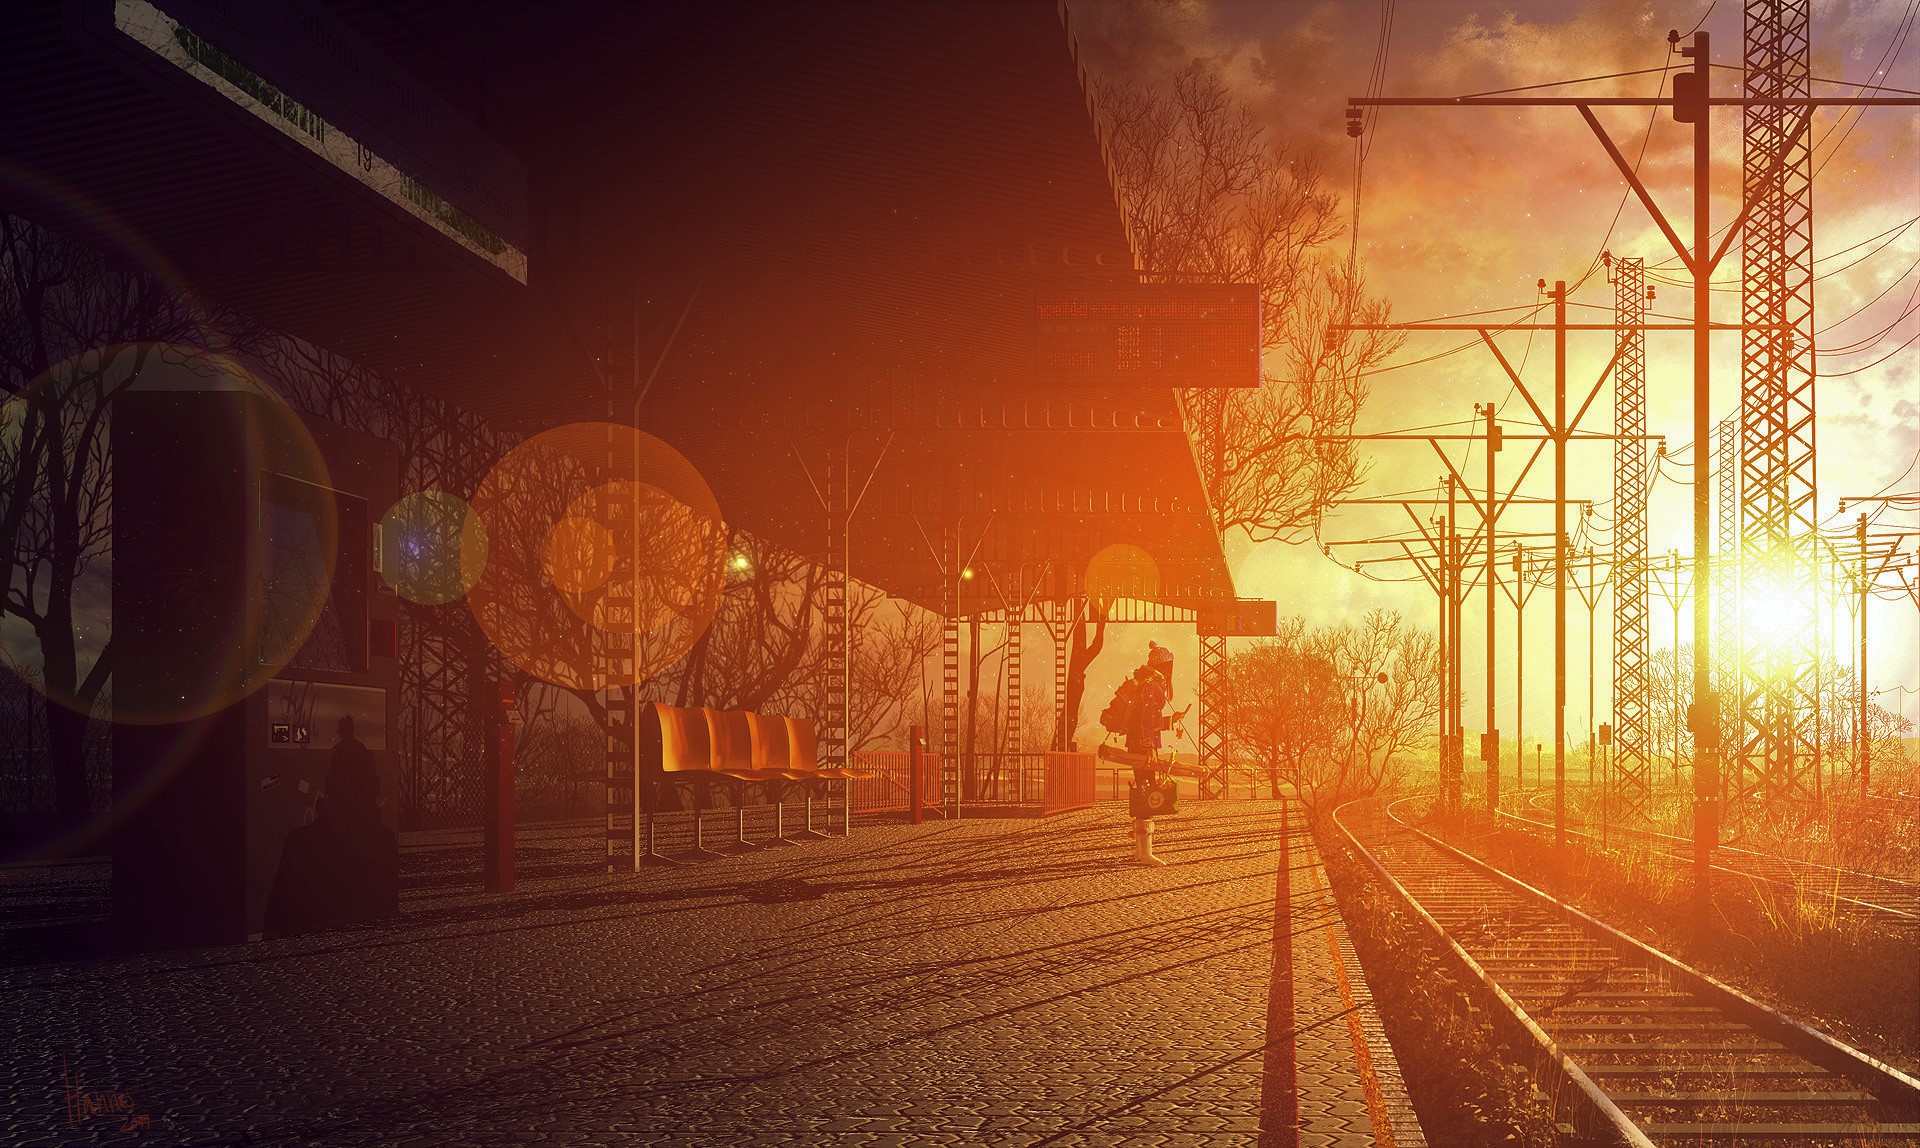 Waiting For The Train At Sunset by Johannes Voss